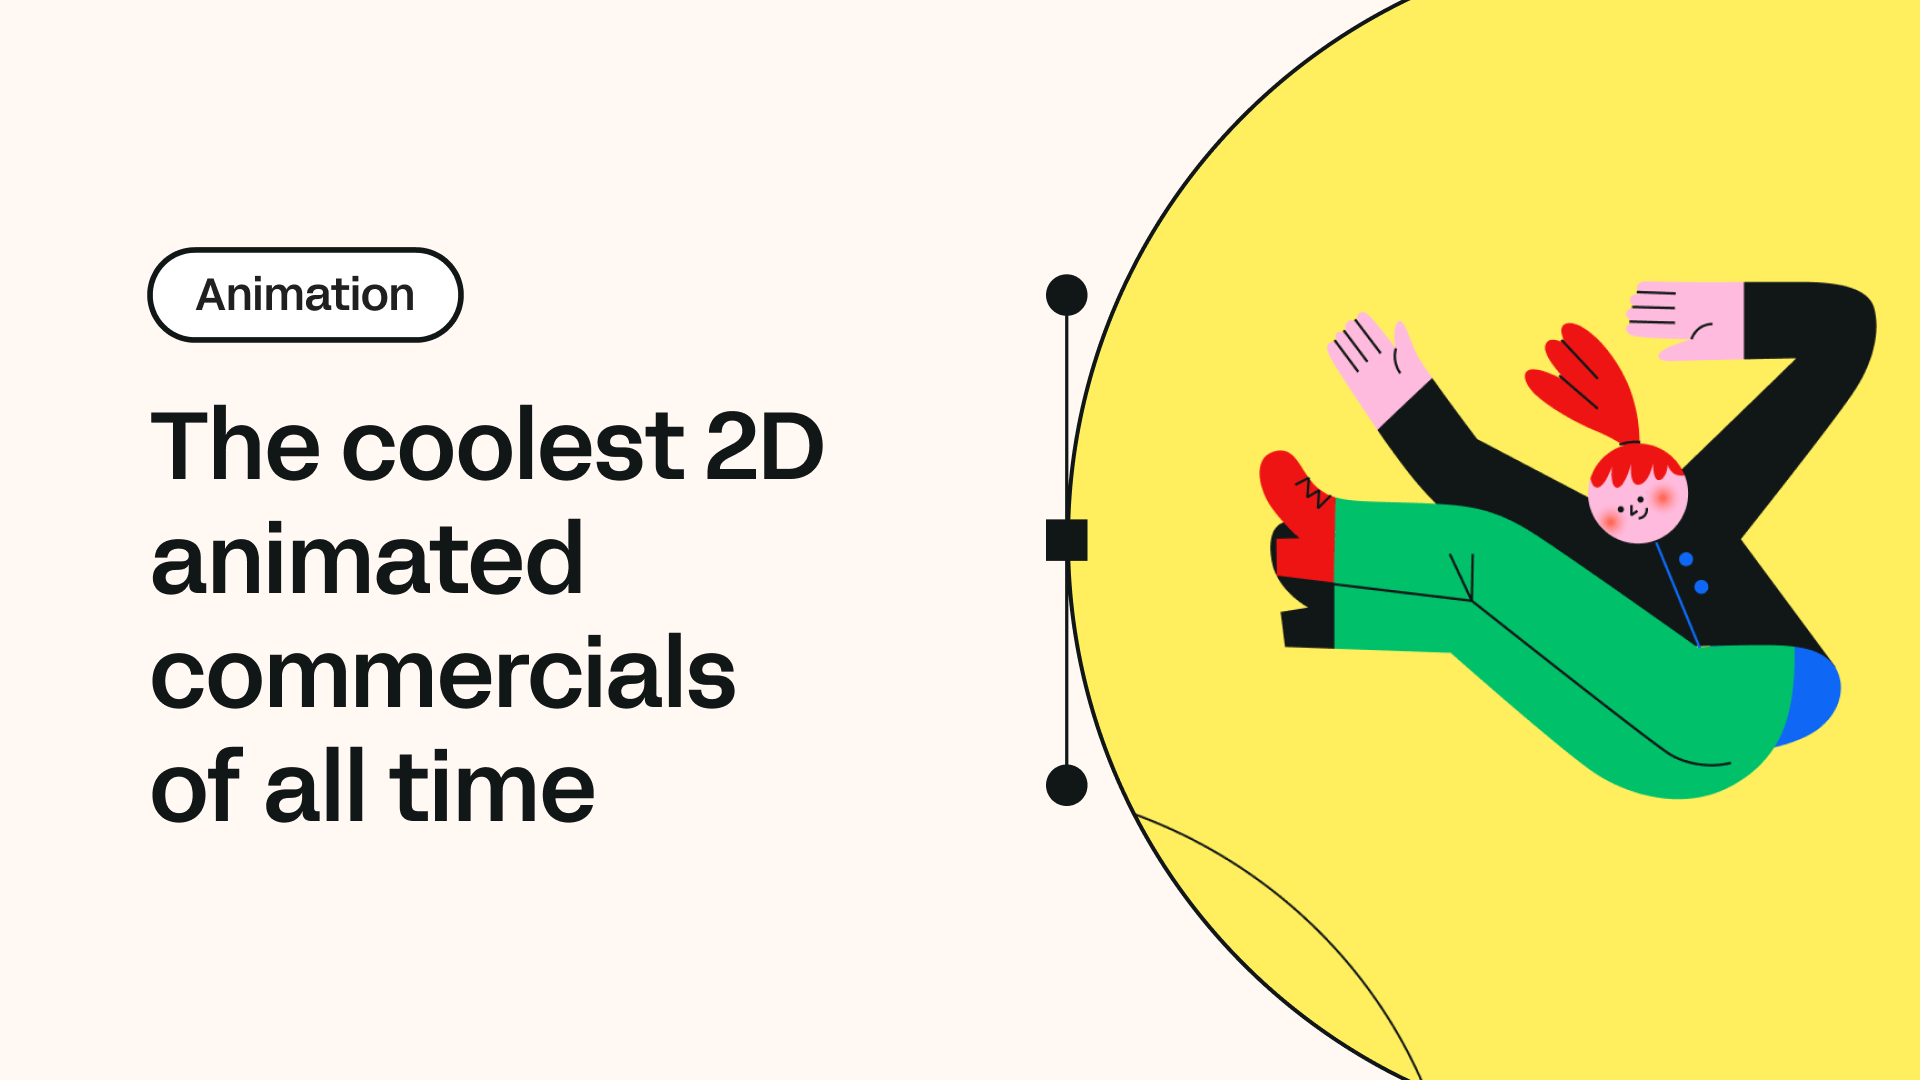 The coolest 2D animated commercials of all time